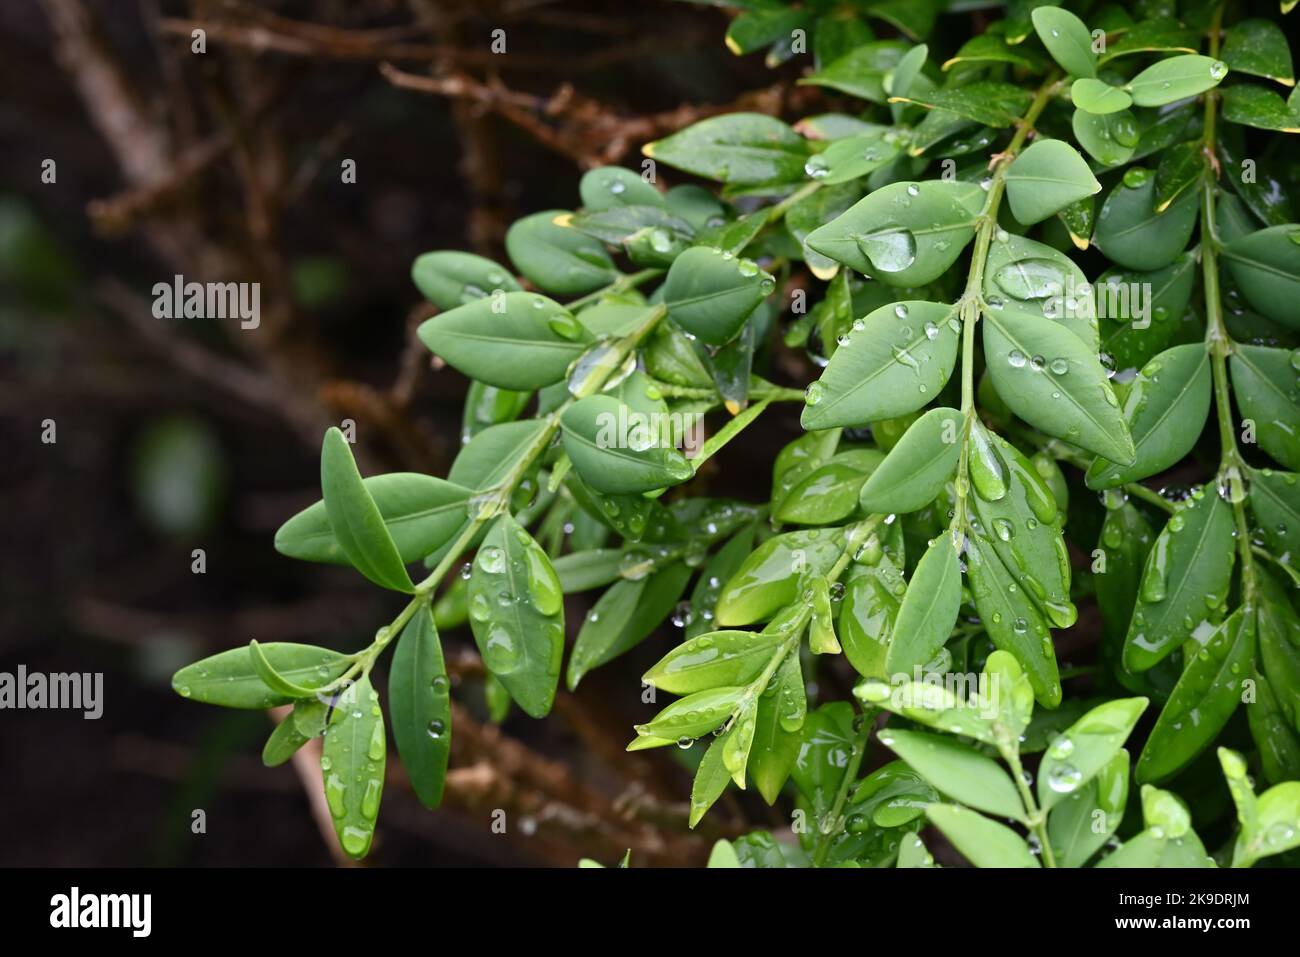 Bright green leaves covered in drops of water, following rain on a wet day Stock Photo